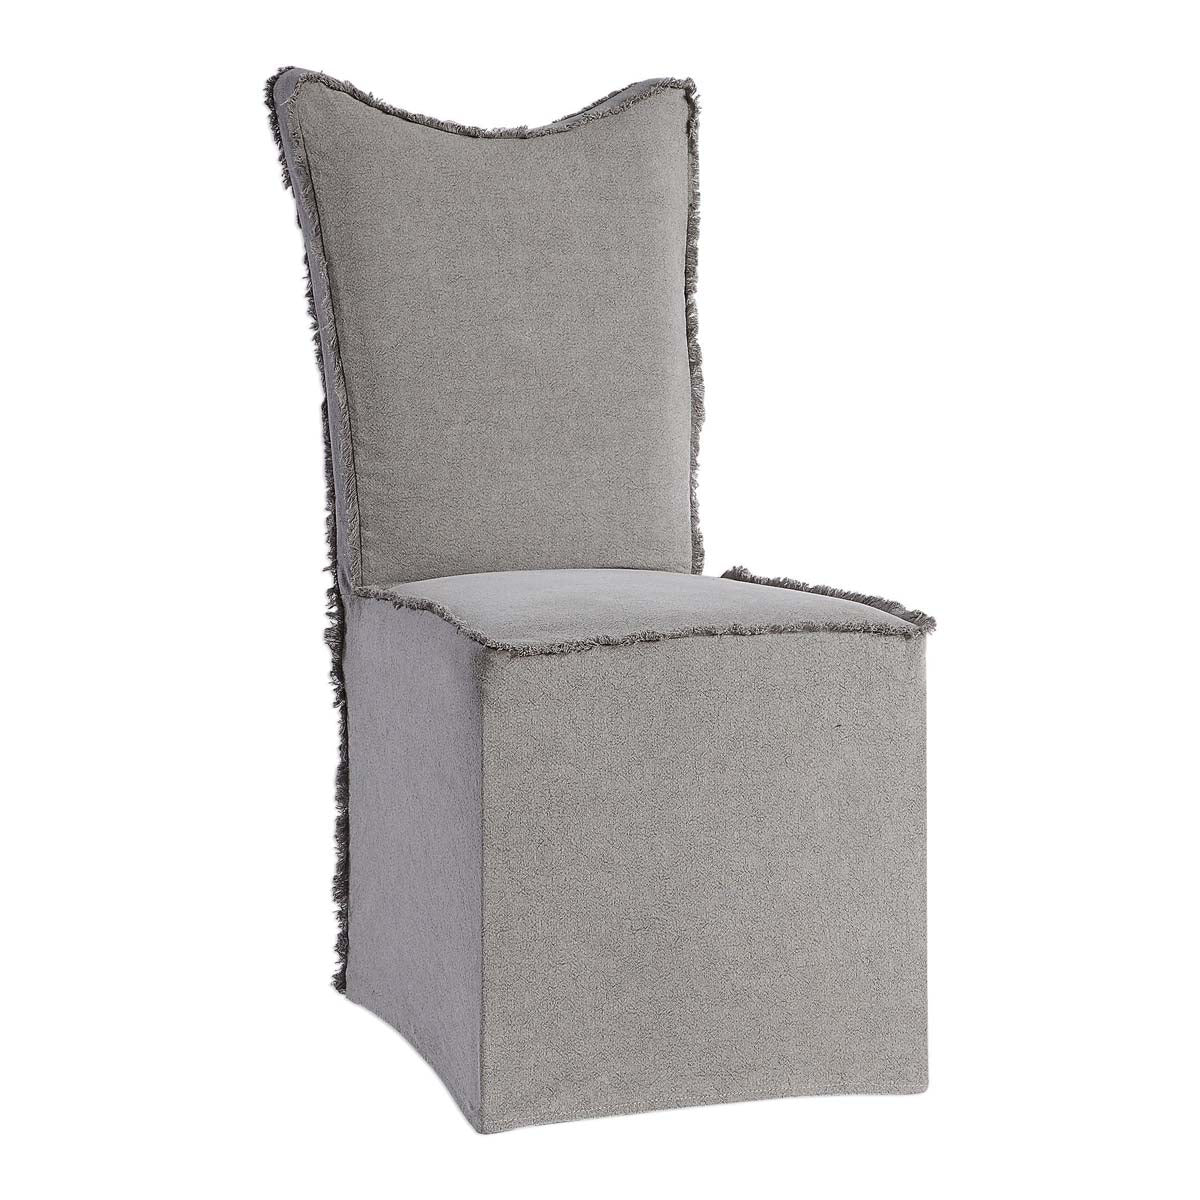 Uttermost Narissa Armless Chairs, Set Of 2